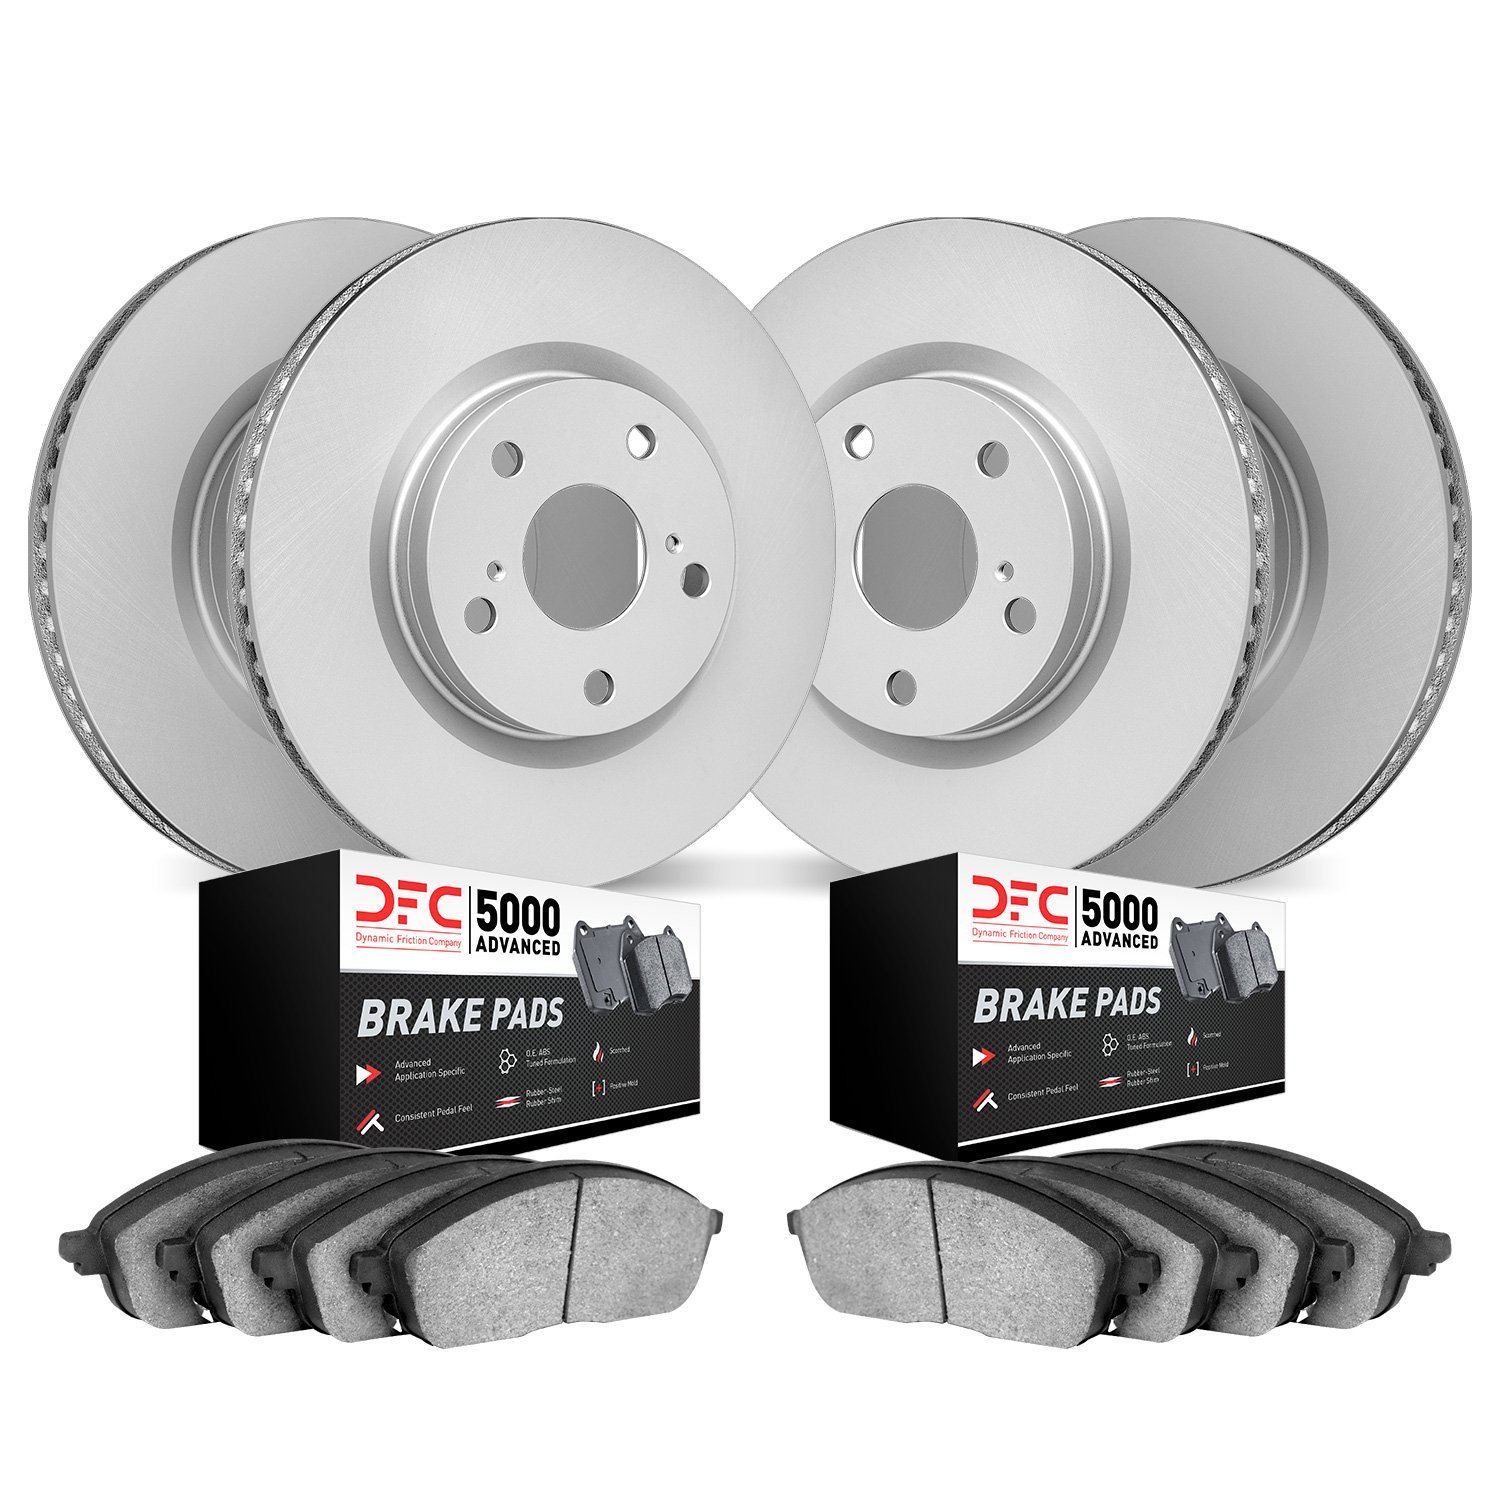 4504-45015 Geospec Brake Rotors w/5000 Advanced Brake Pads Kit, 2010-2015 GM, Position: Front and Rear